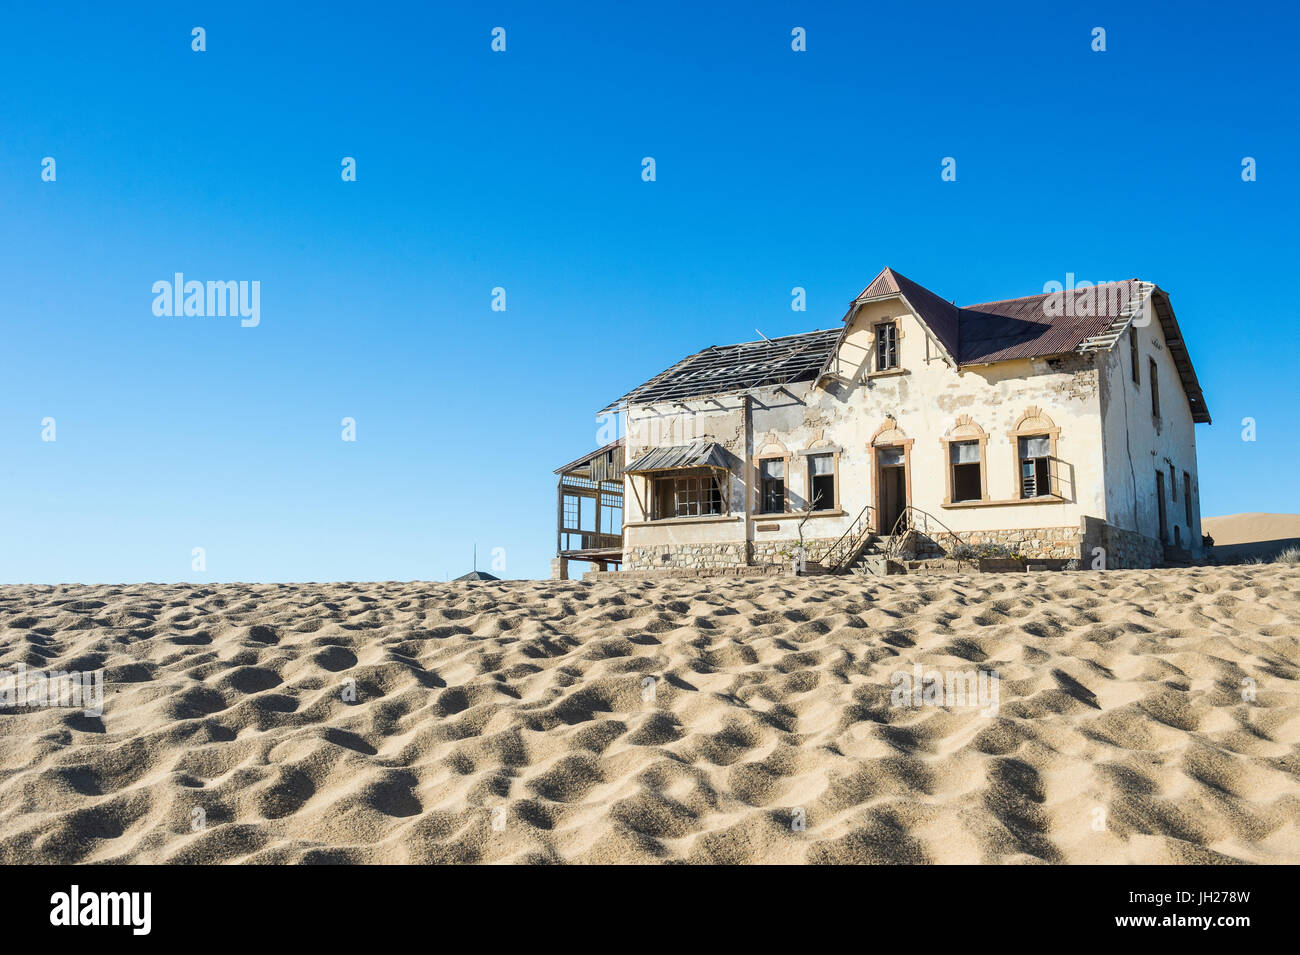 Colonial house, old diamond ghost town, Kolmanskop (Coleman's Hill), near Luderitz, Namibia, Africa Stock Photo